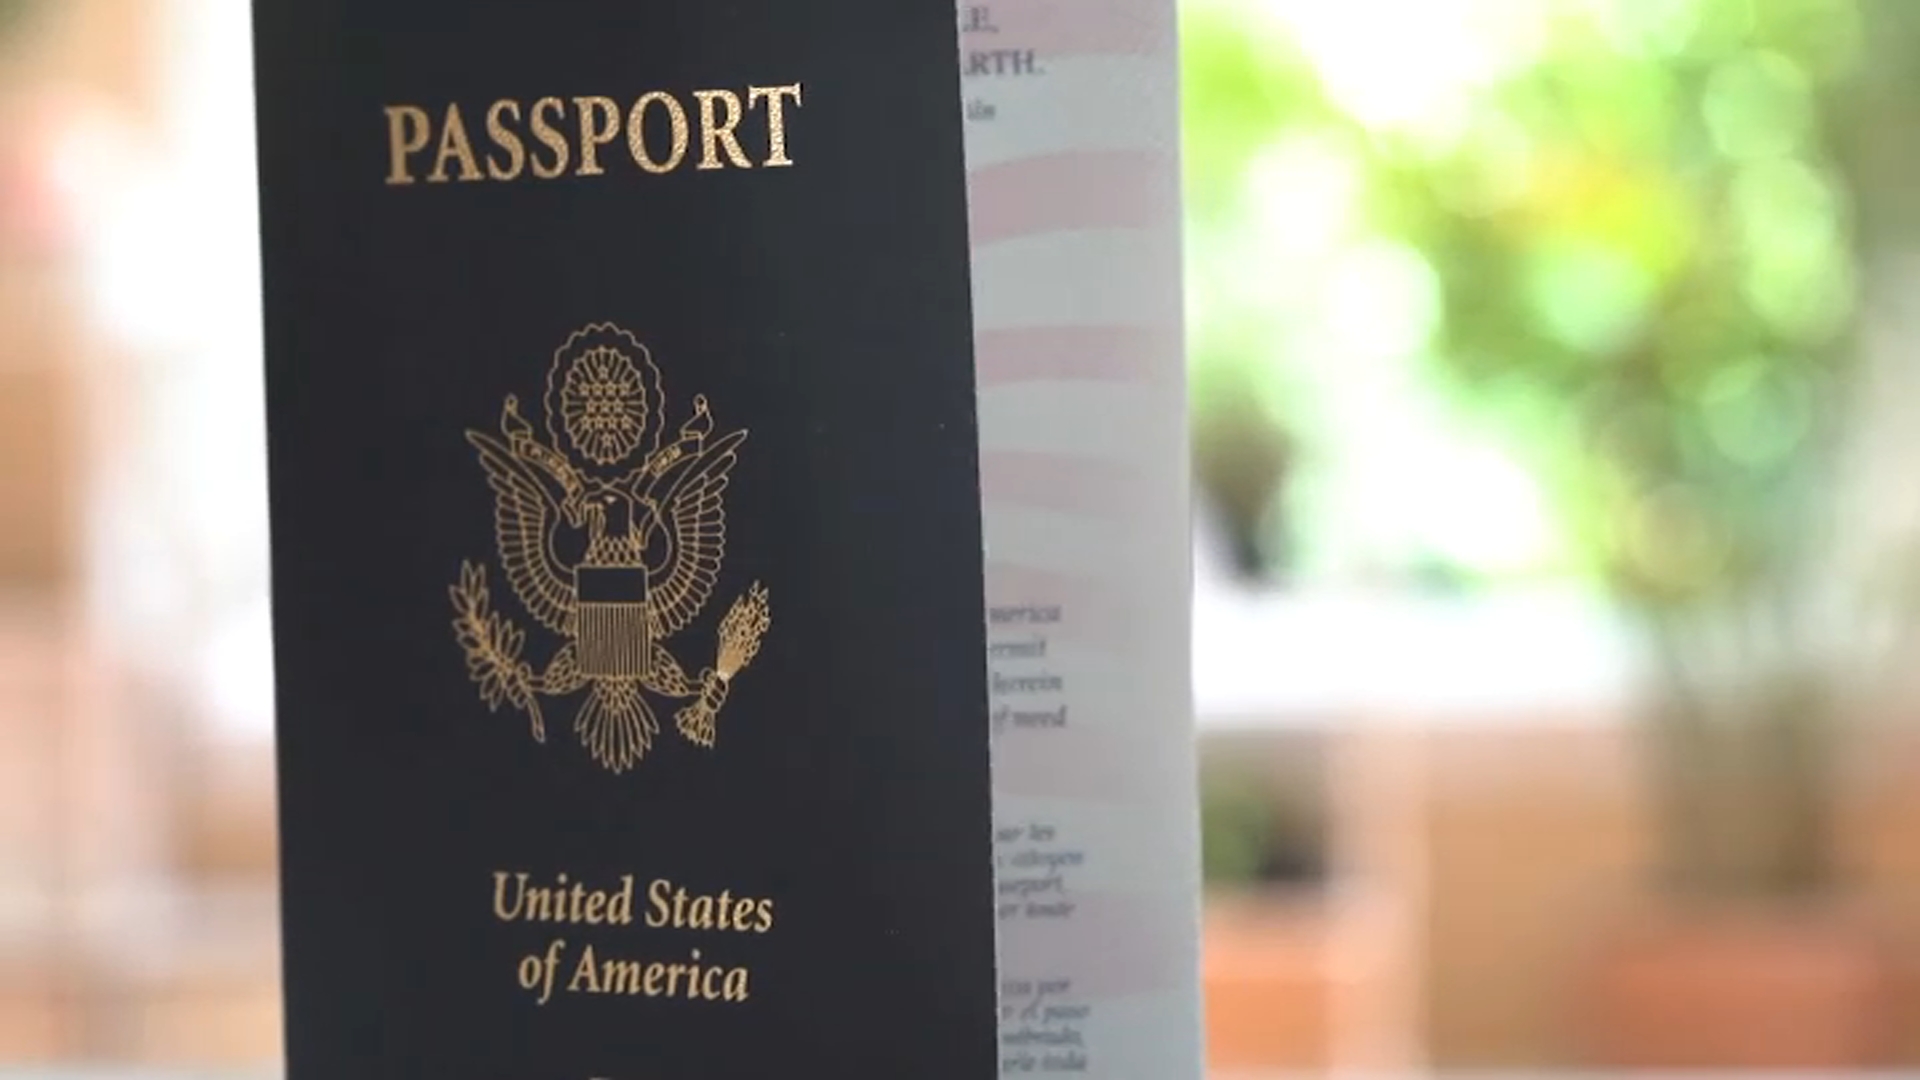 can an expired passport be used for identification